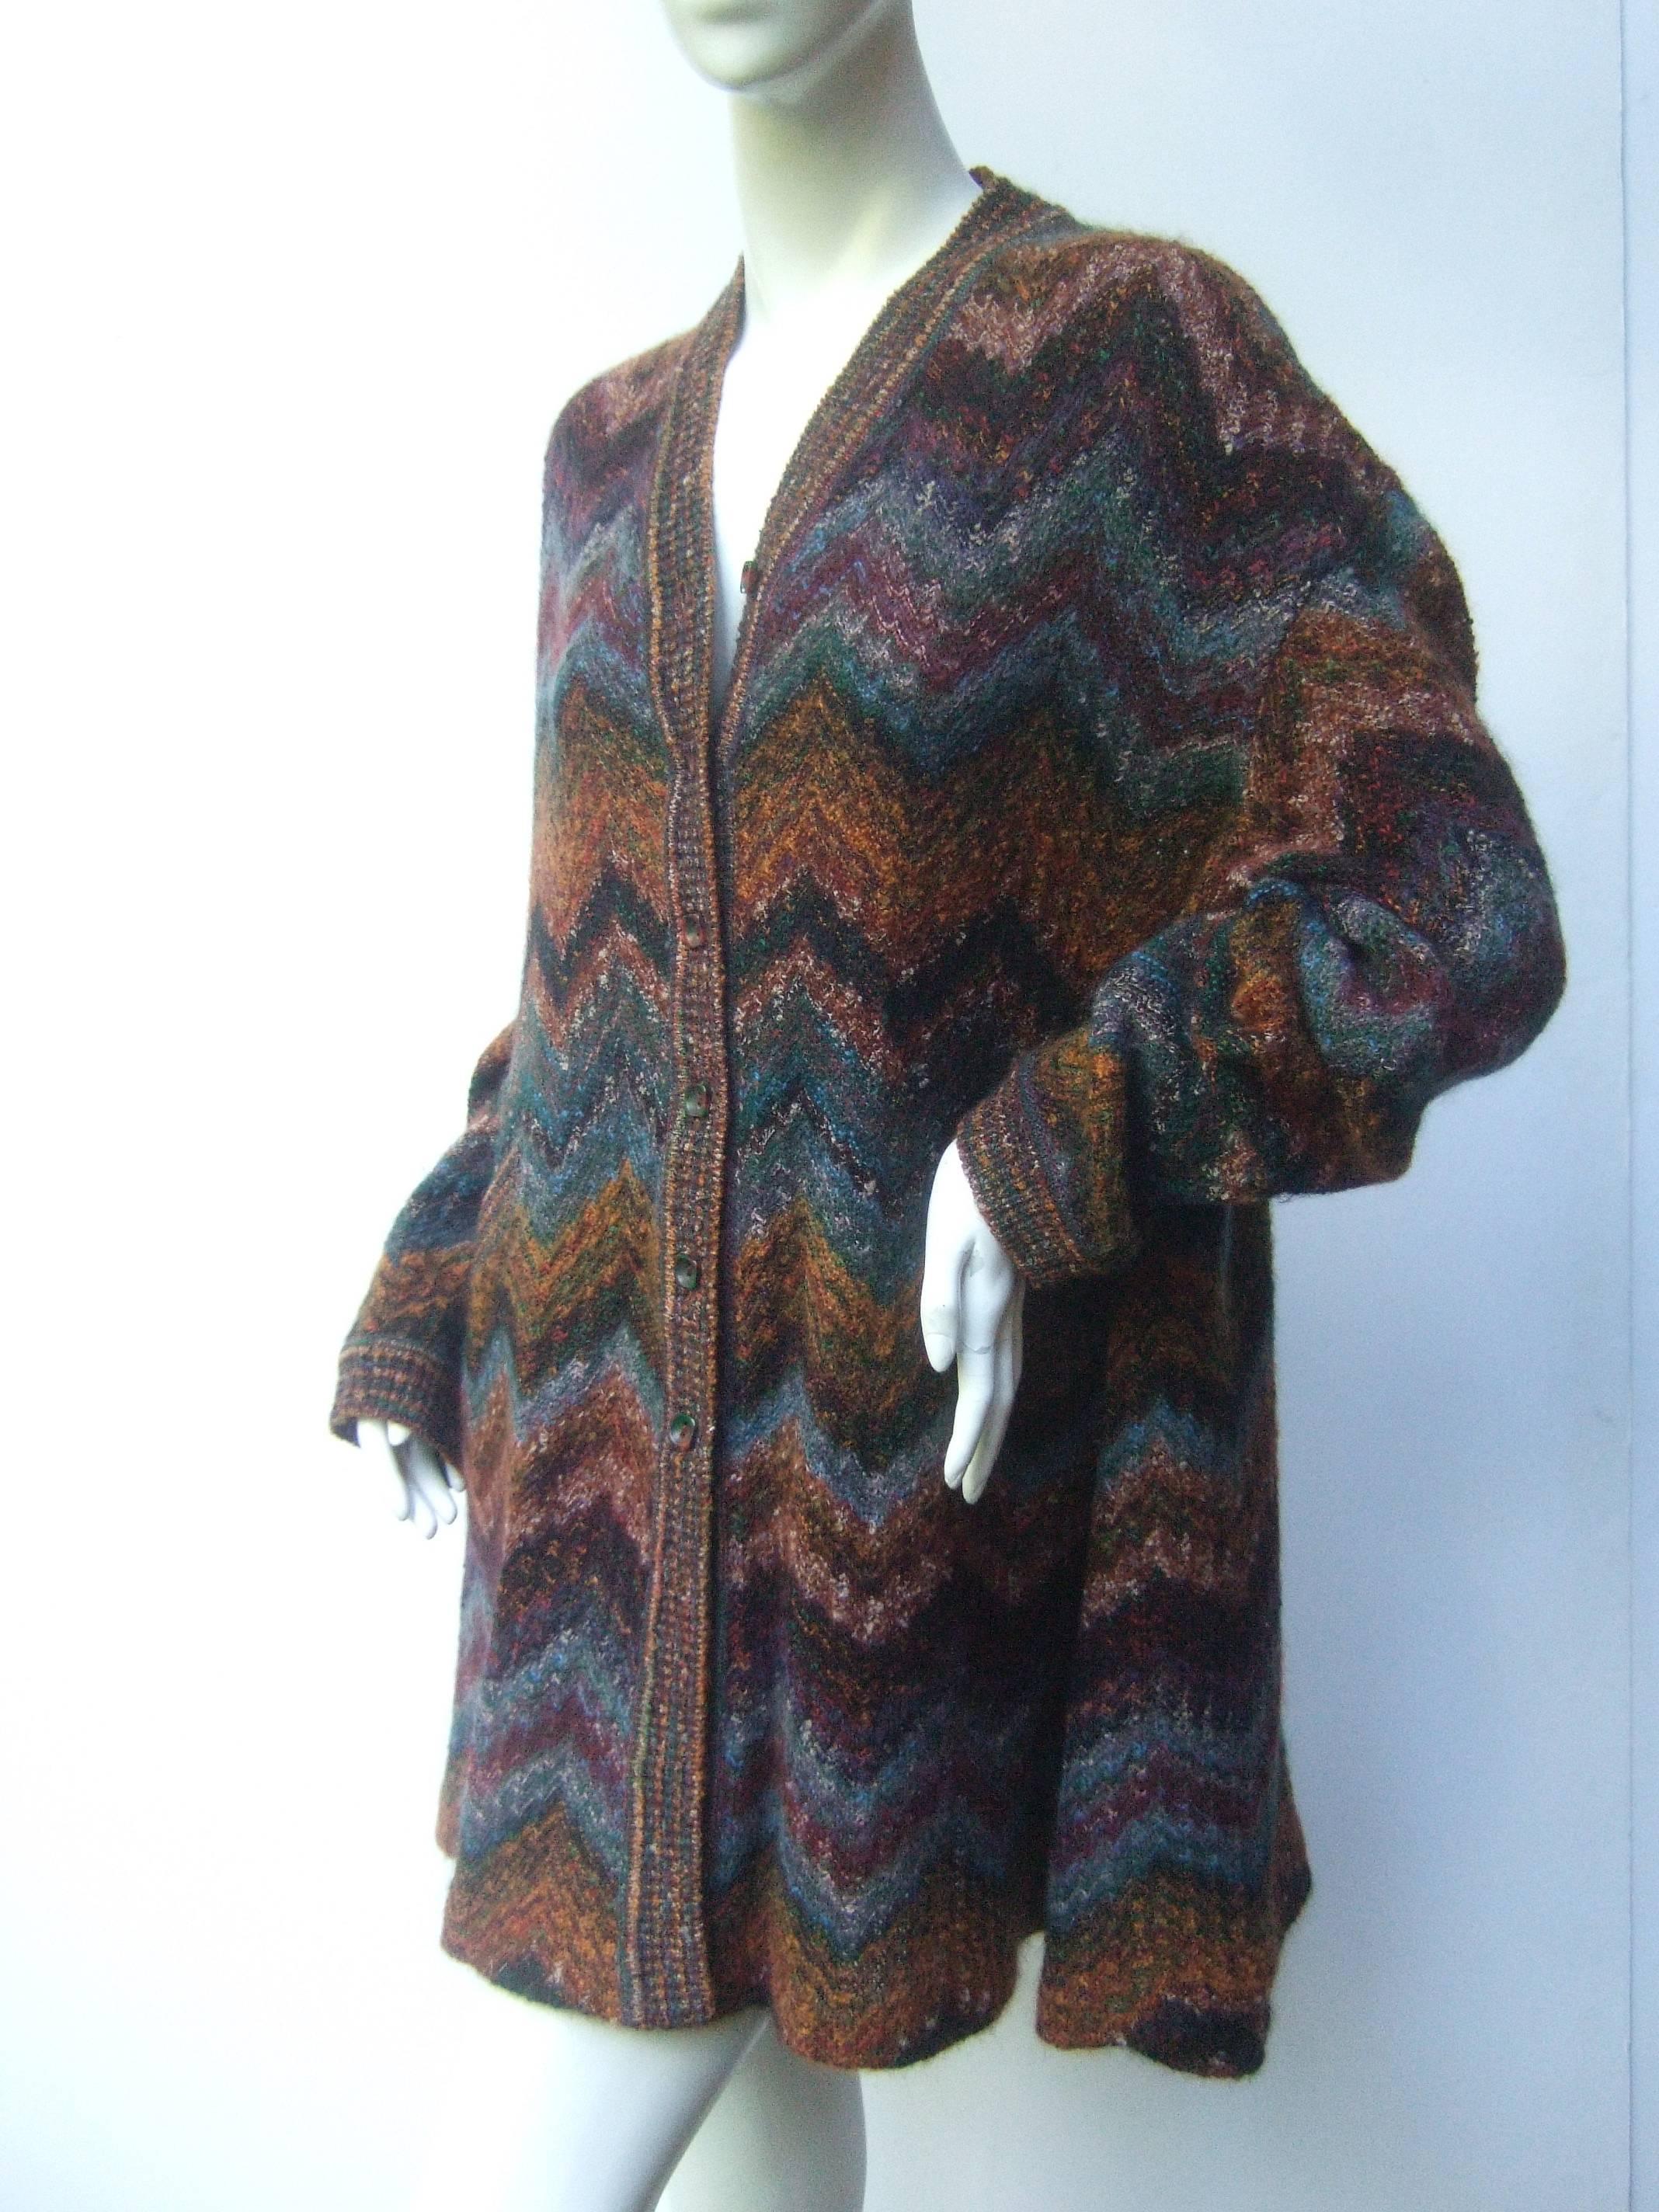 Missoni Italy Chevron wool knit long cardigan for Neiman Marcus c 1980s
The fuzzy wool knit cardigan is designed with Missoni's 
iconic zigzag chevron pattern

The autumn colors range from burnt orange, muted greens,
burgundy, eggplant with